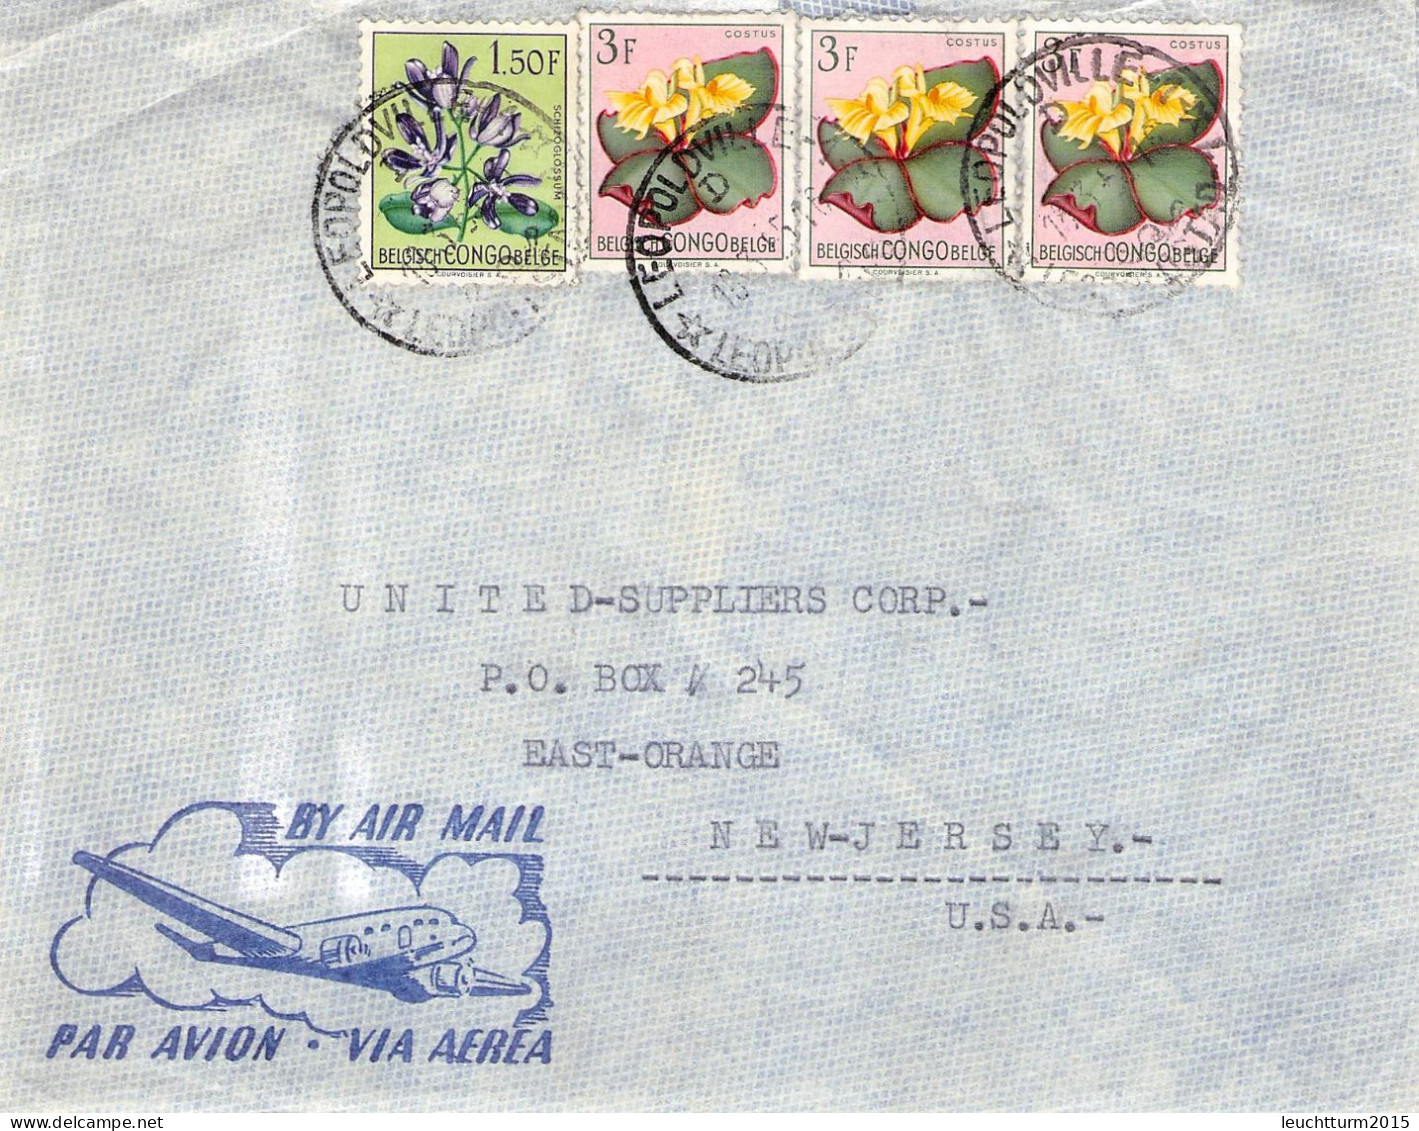 BELG. CONGO - AIRMAIL 1955 LEOPOLDVILLE > NEW JERSEY Mi #305, 307 / YZ402 - Covers & Documents